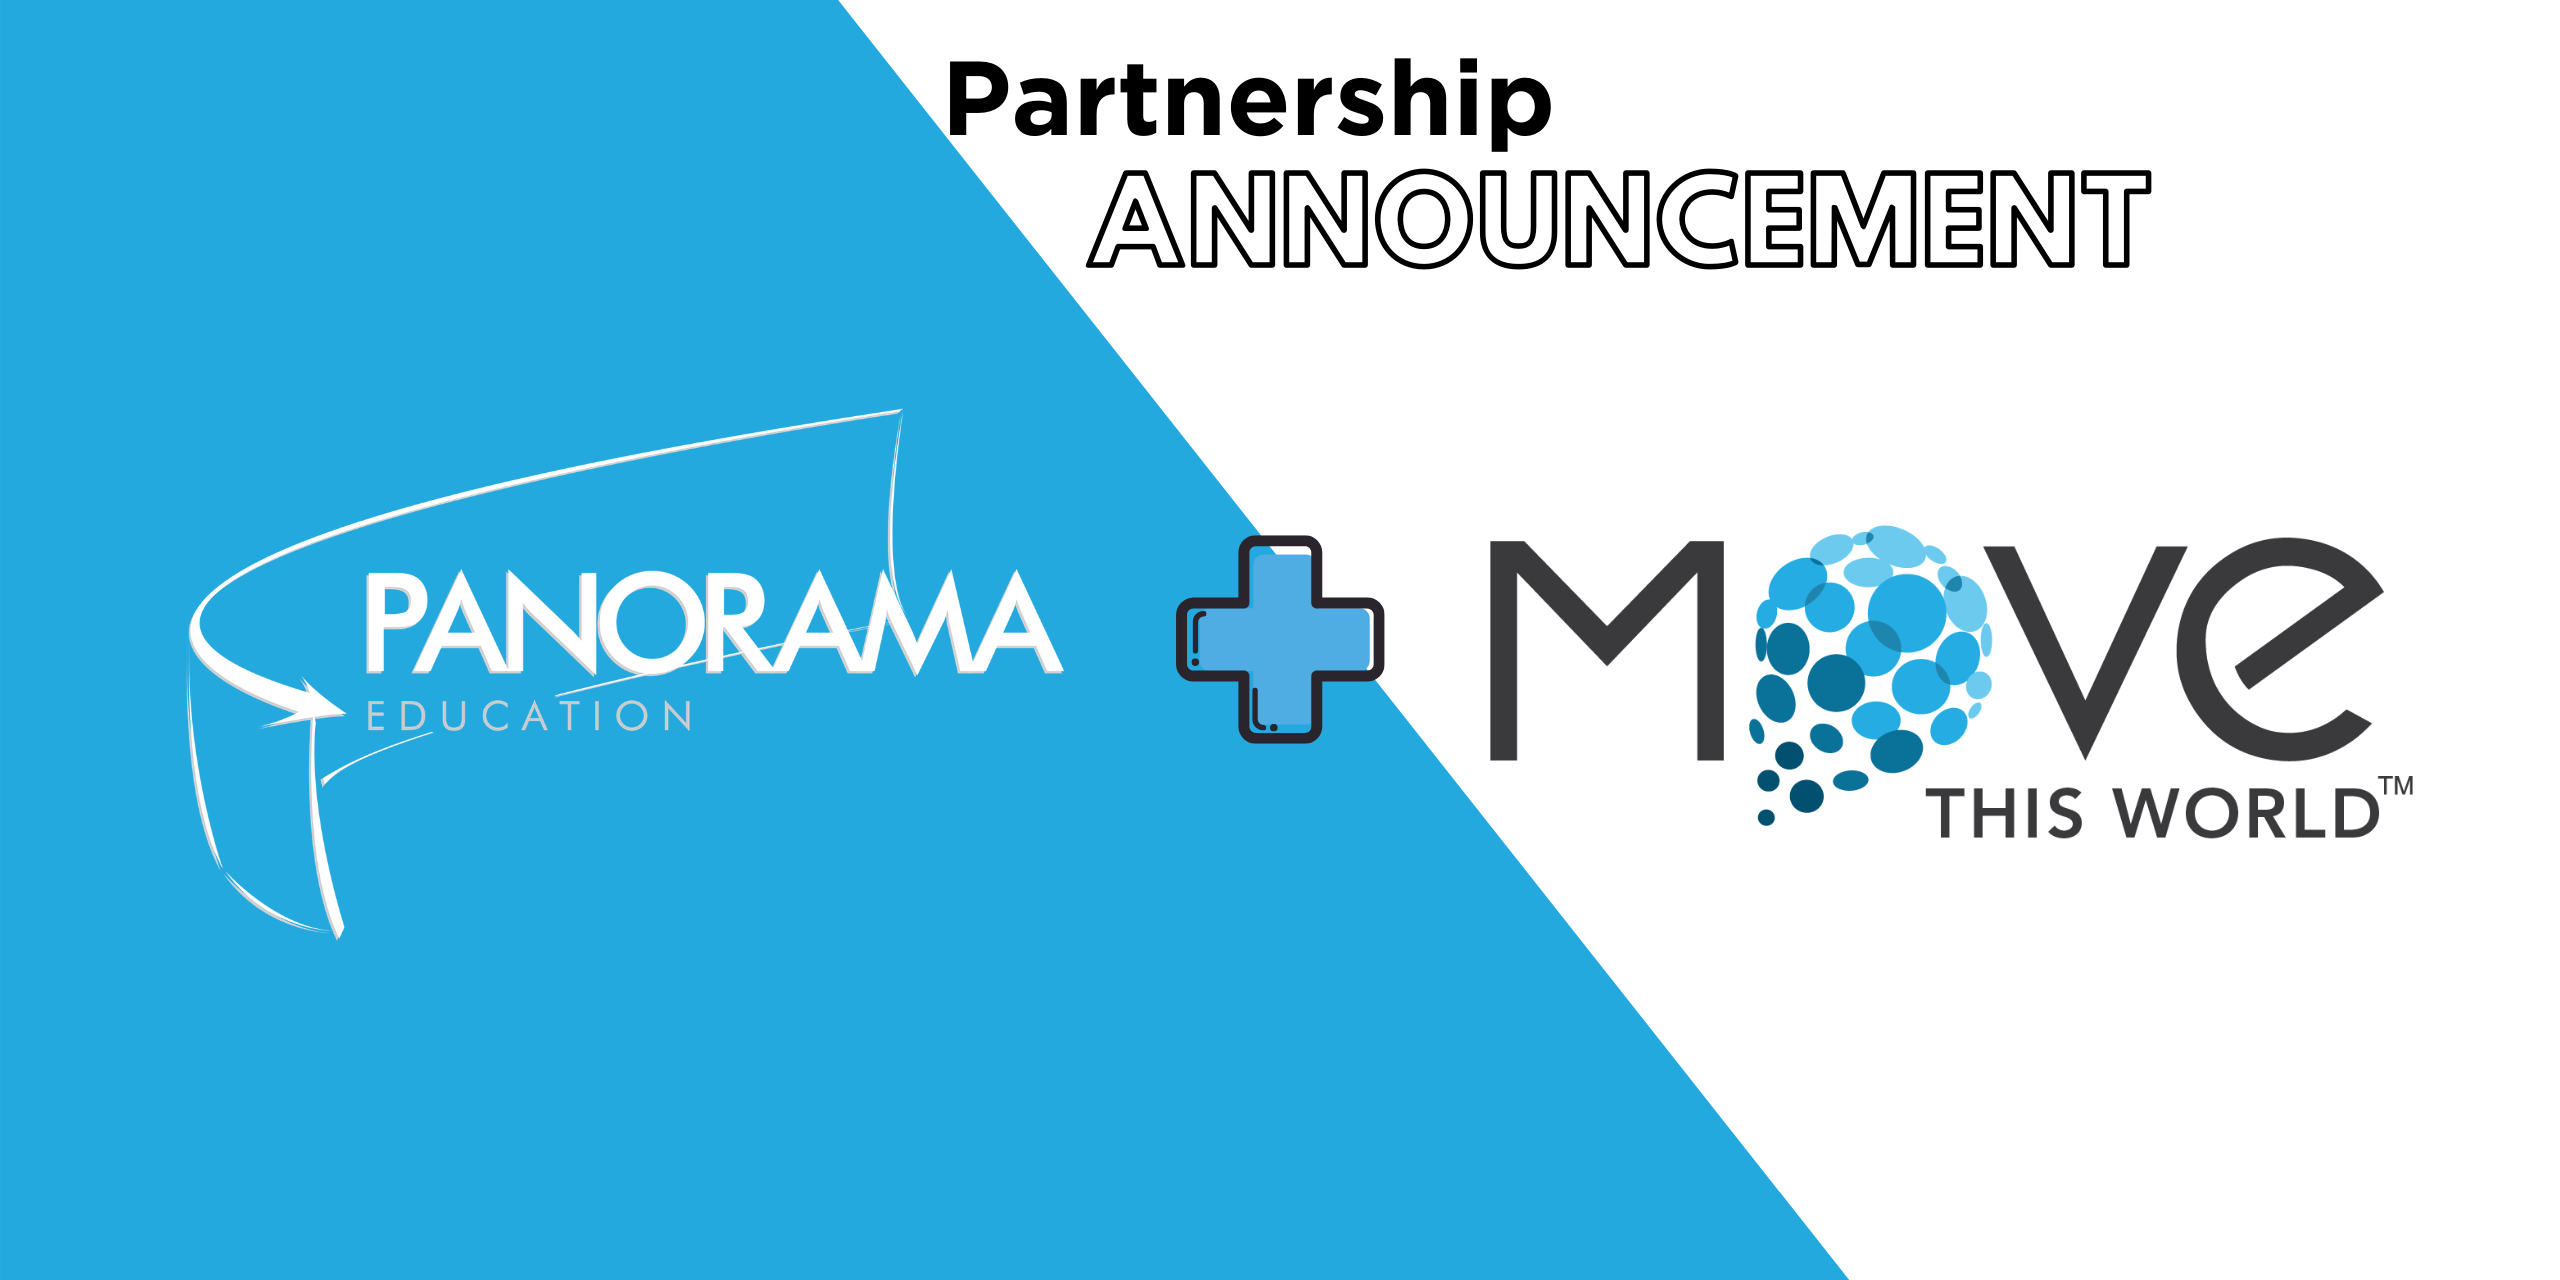 Move This World and Panorama Partner to Provide More Schools With Creative Social-Emotional Learning Exercises